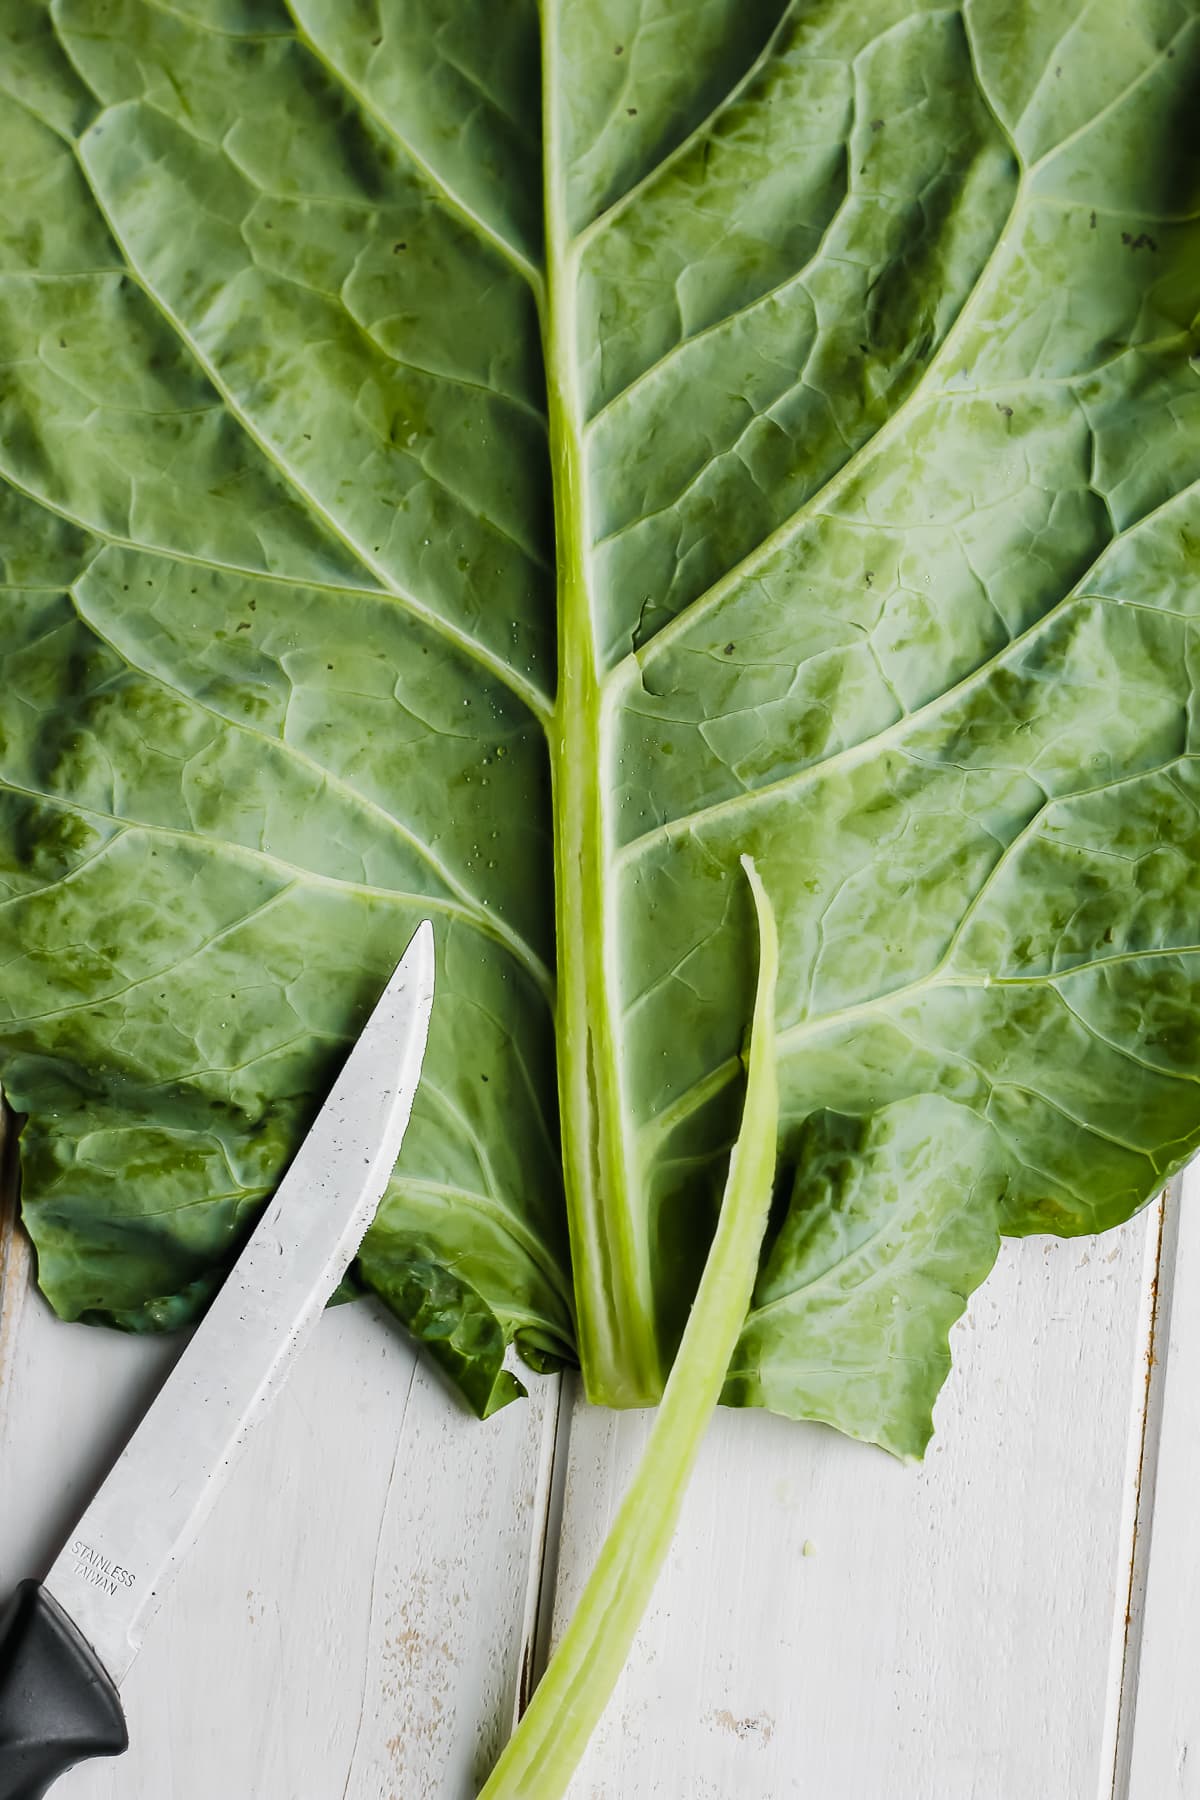 A large collard green leaf with the stem removed.